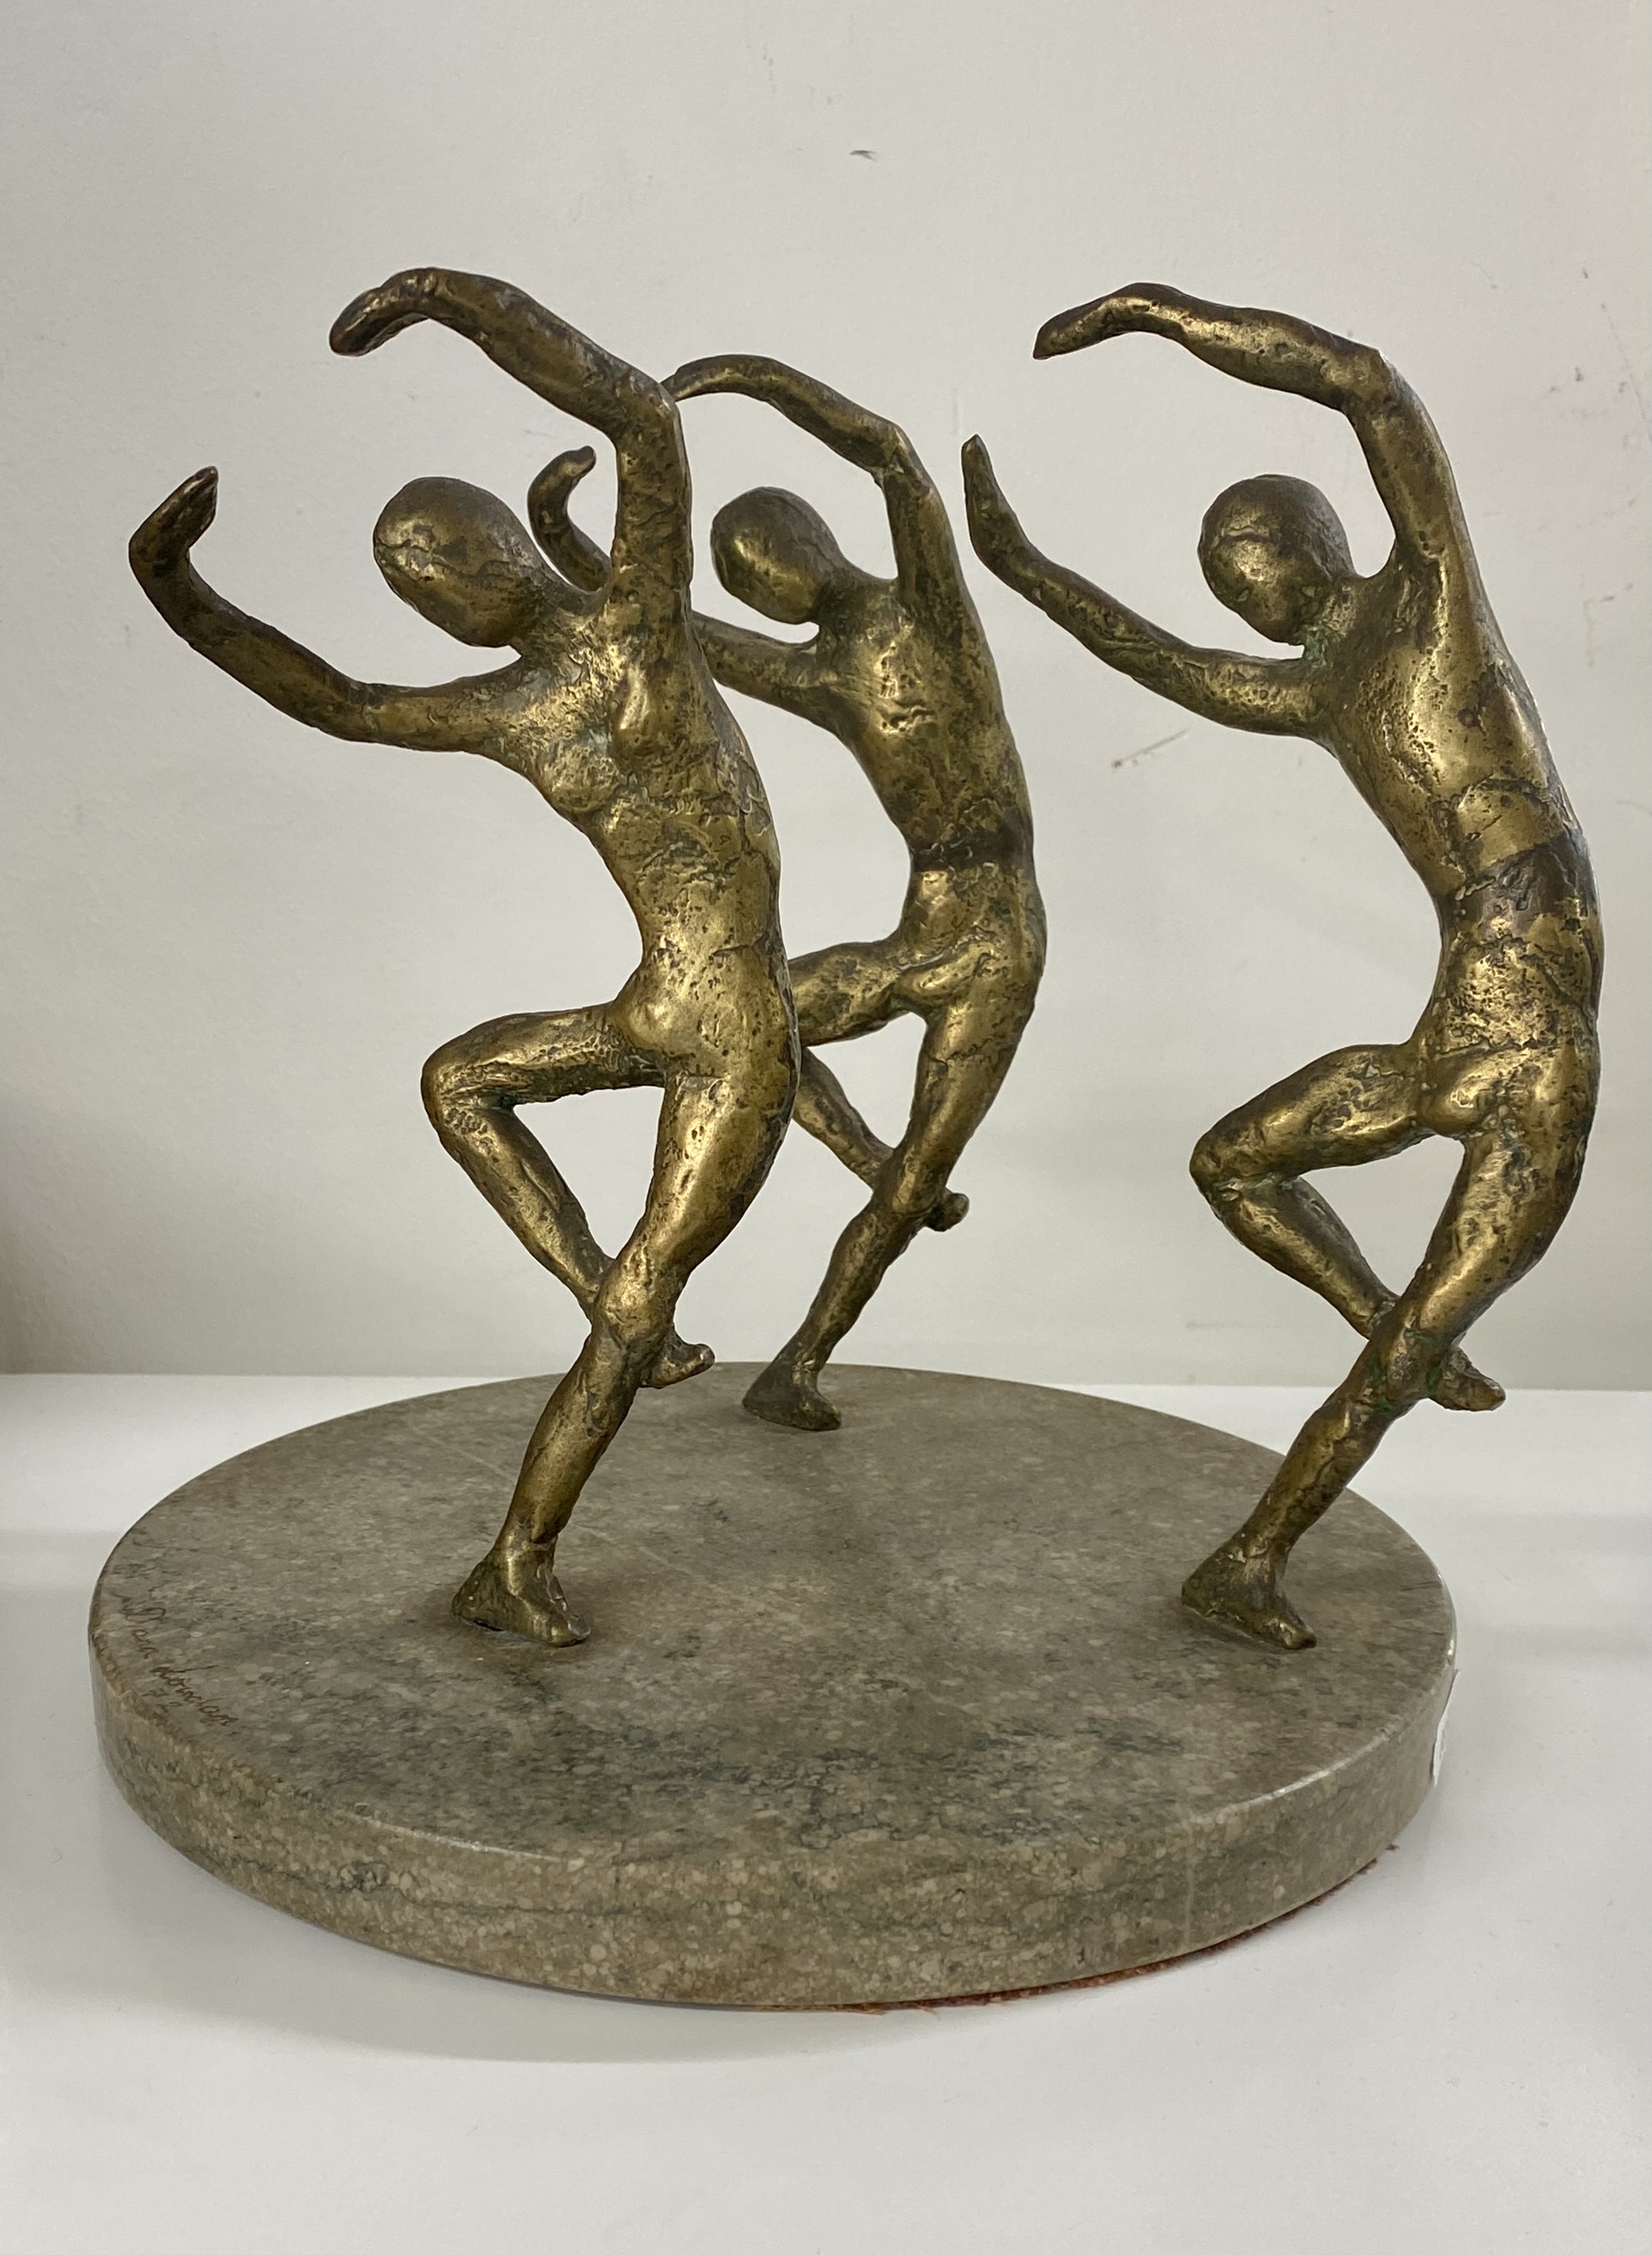 An interesting sculpture on marble base of three dancing figures, signed Lowdon? Diameter 22cm